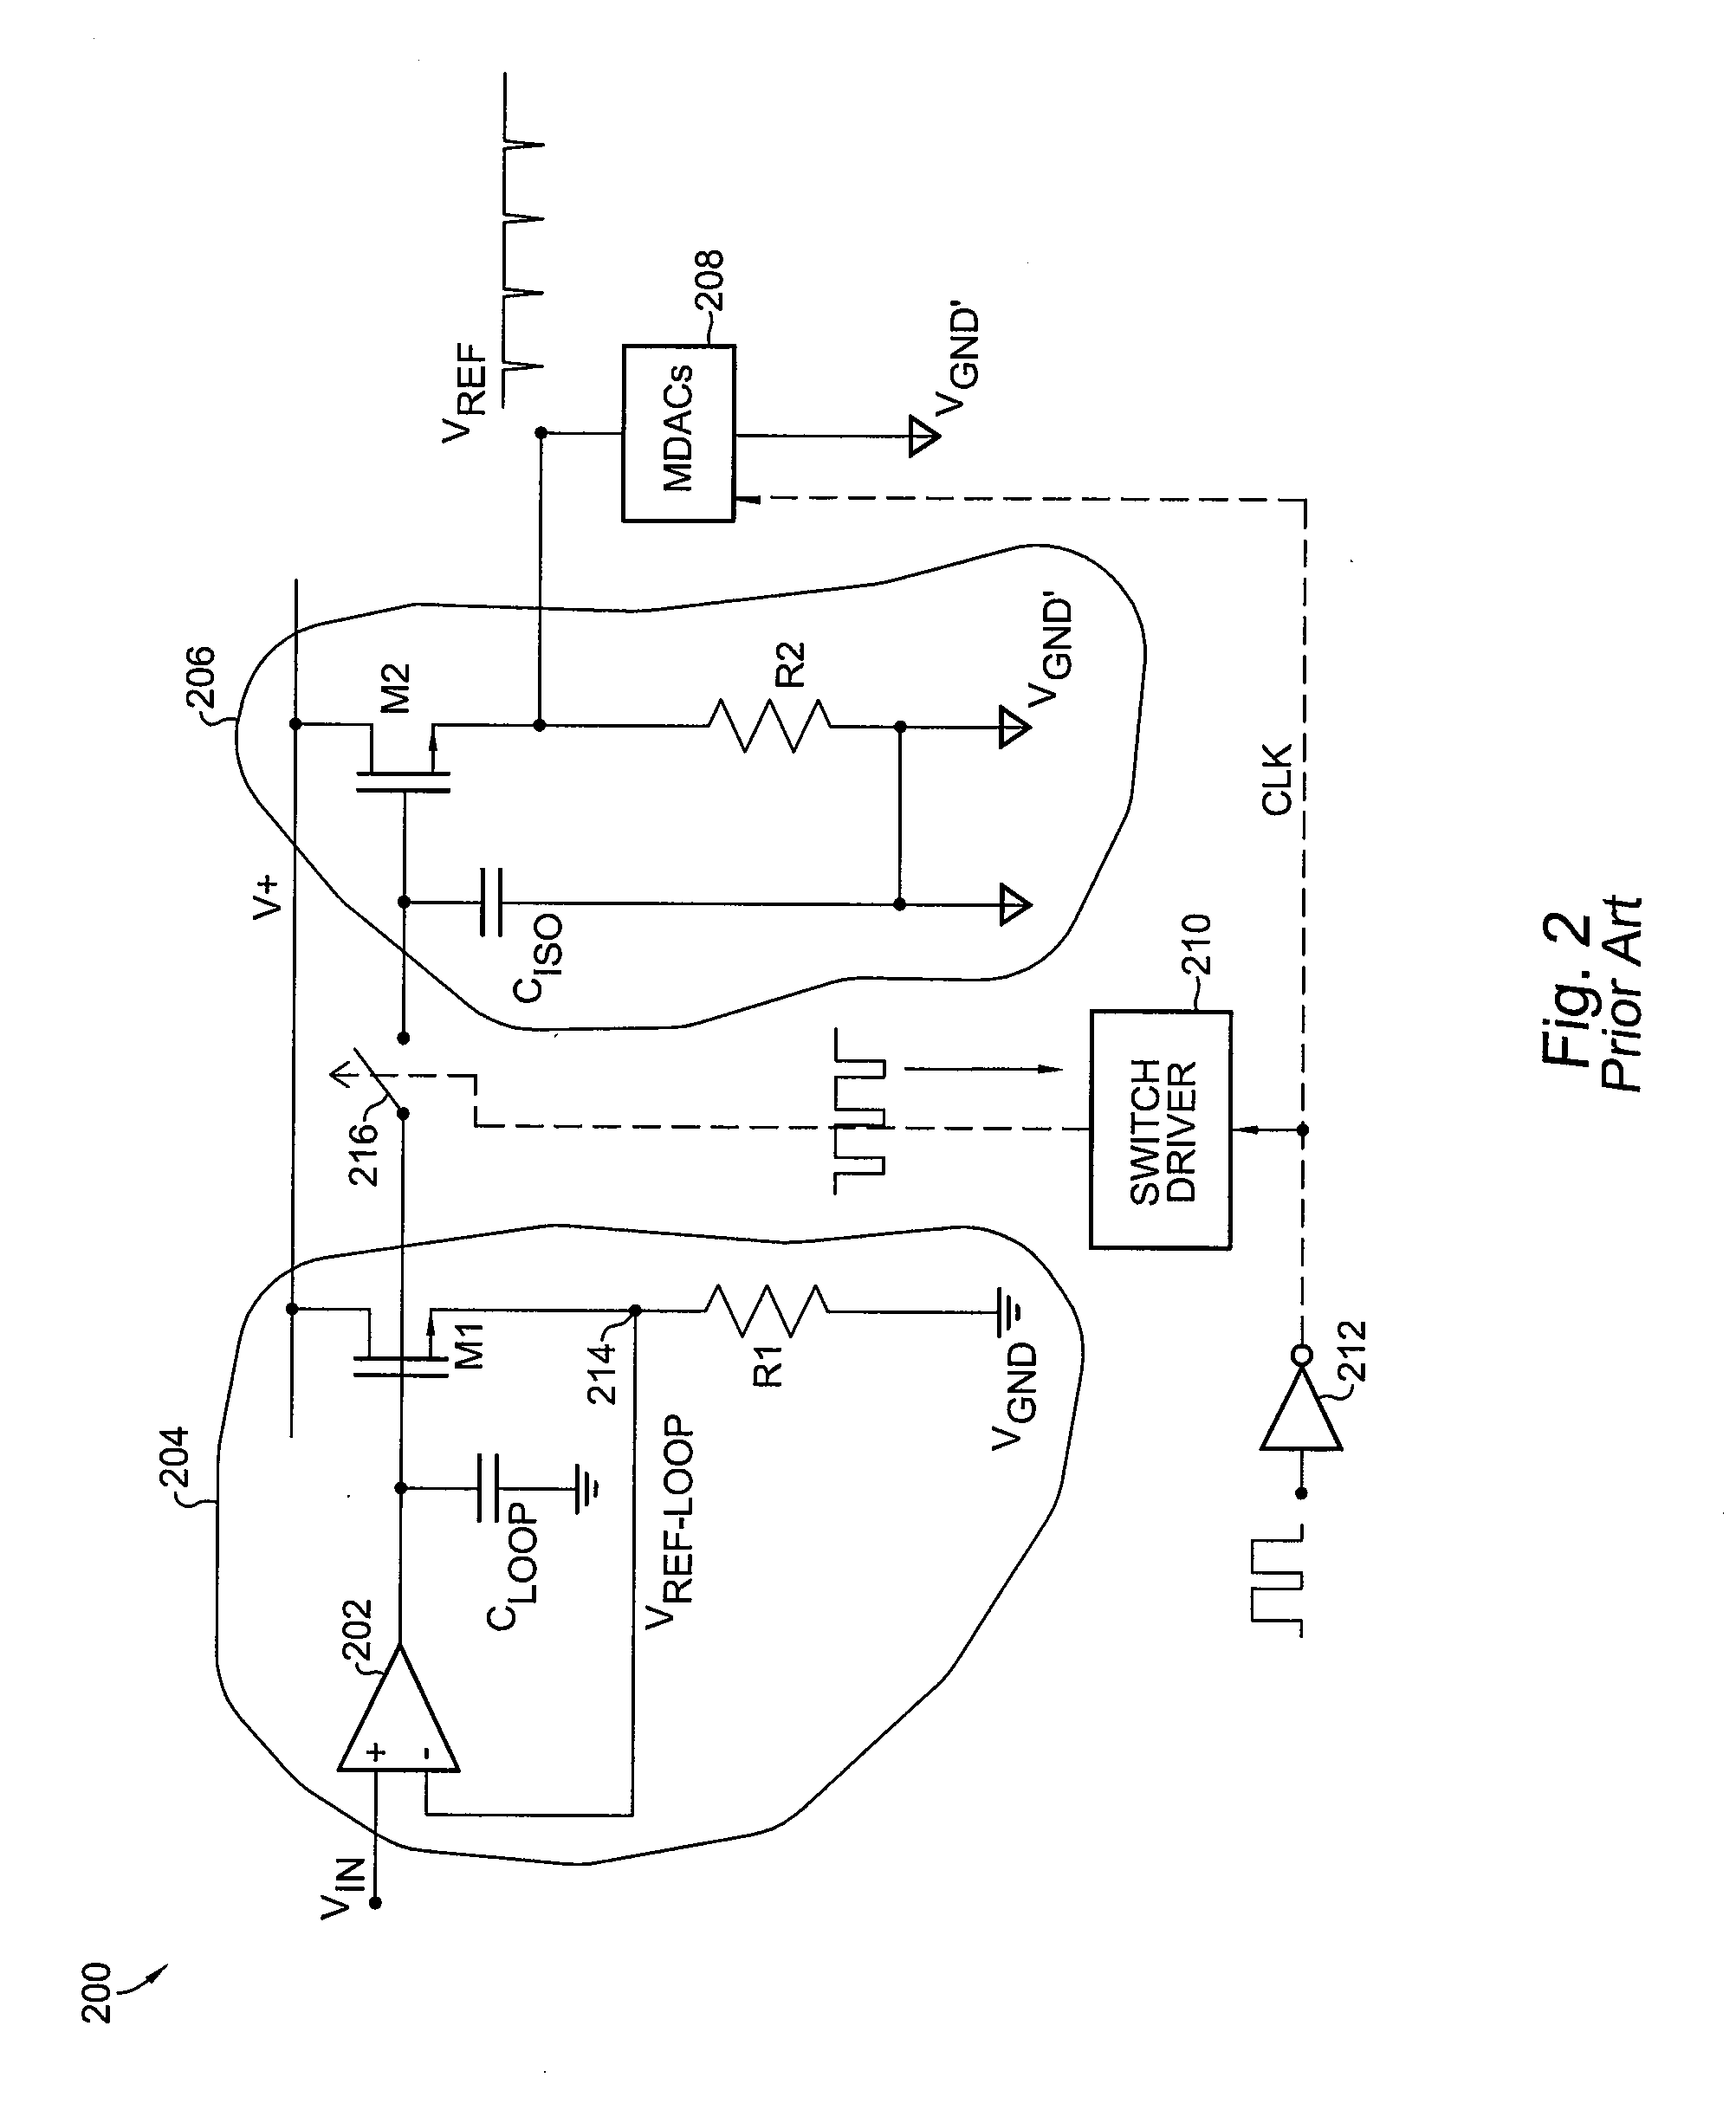 Radiation tolerant circuit for minimizing the dependence of a precision voltage reference from ground bounce and signal glitch